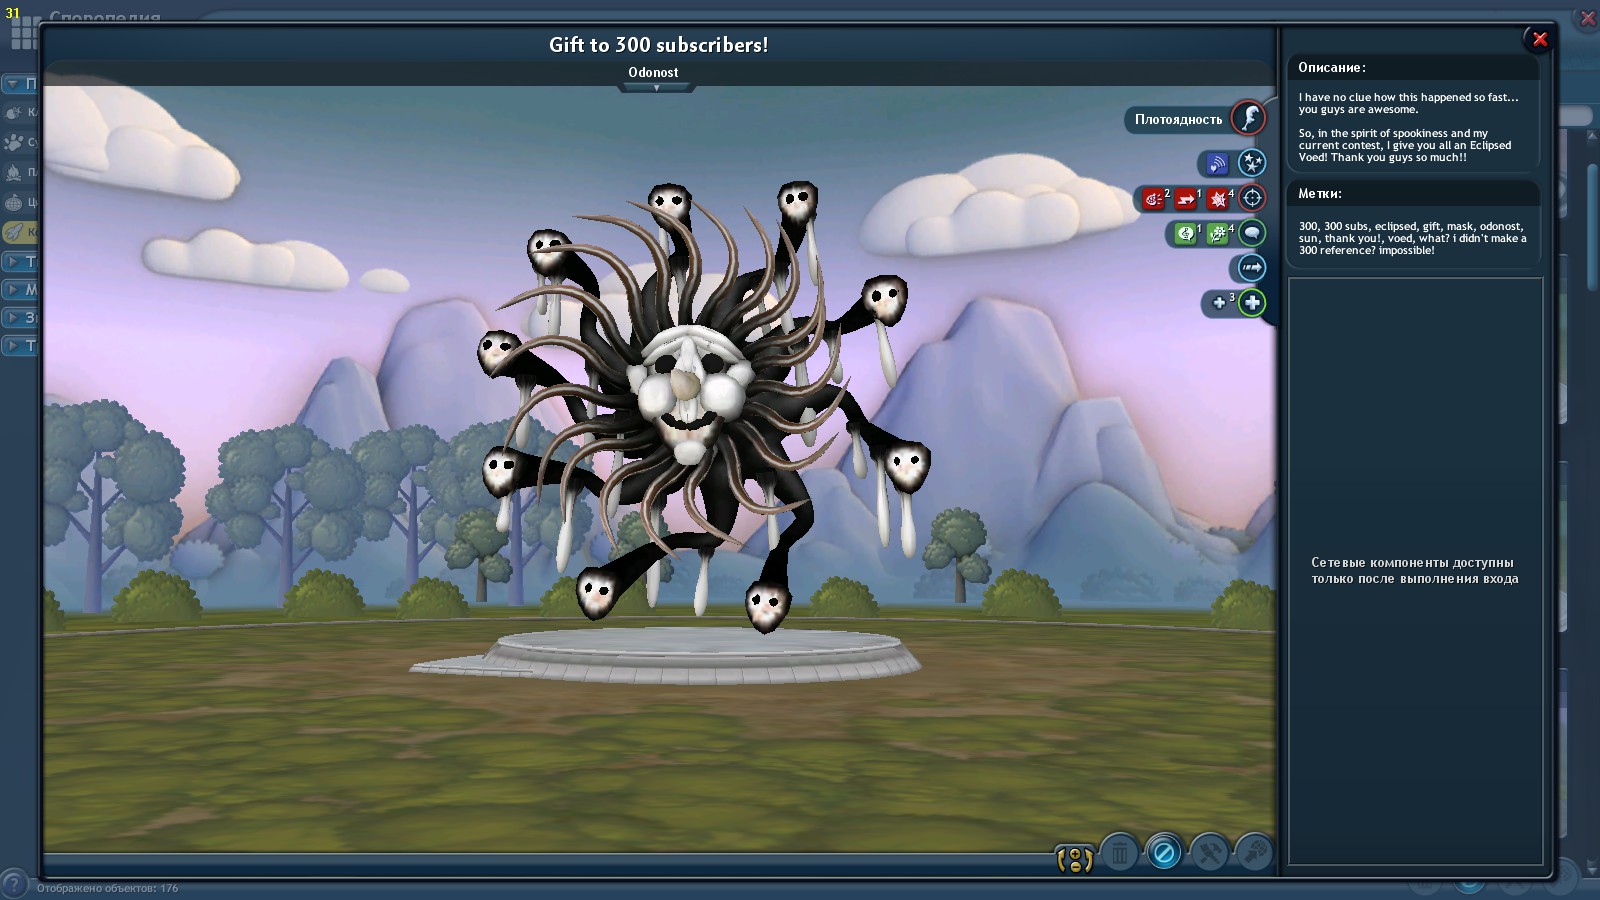 spore creepy and cute was not installed sucessfully